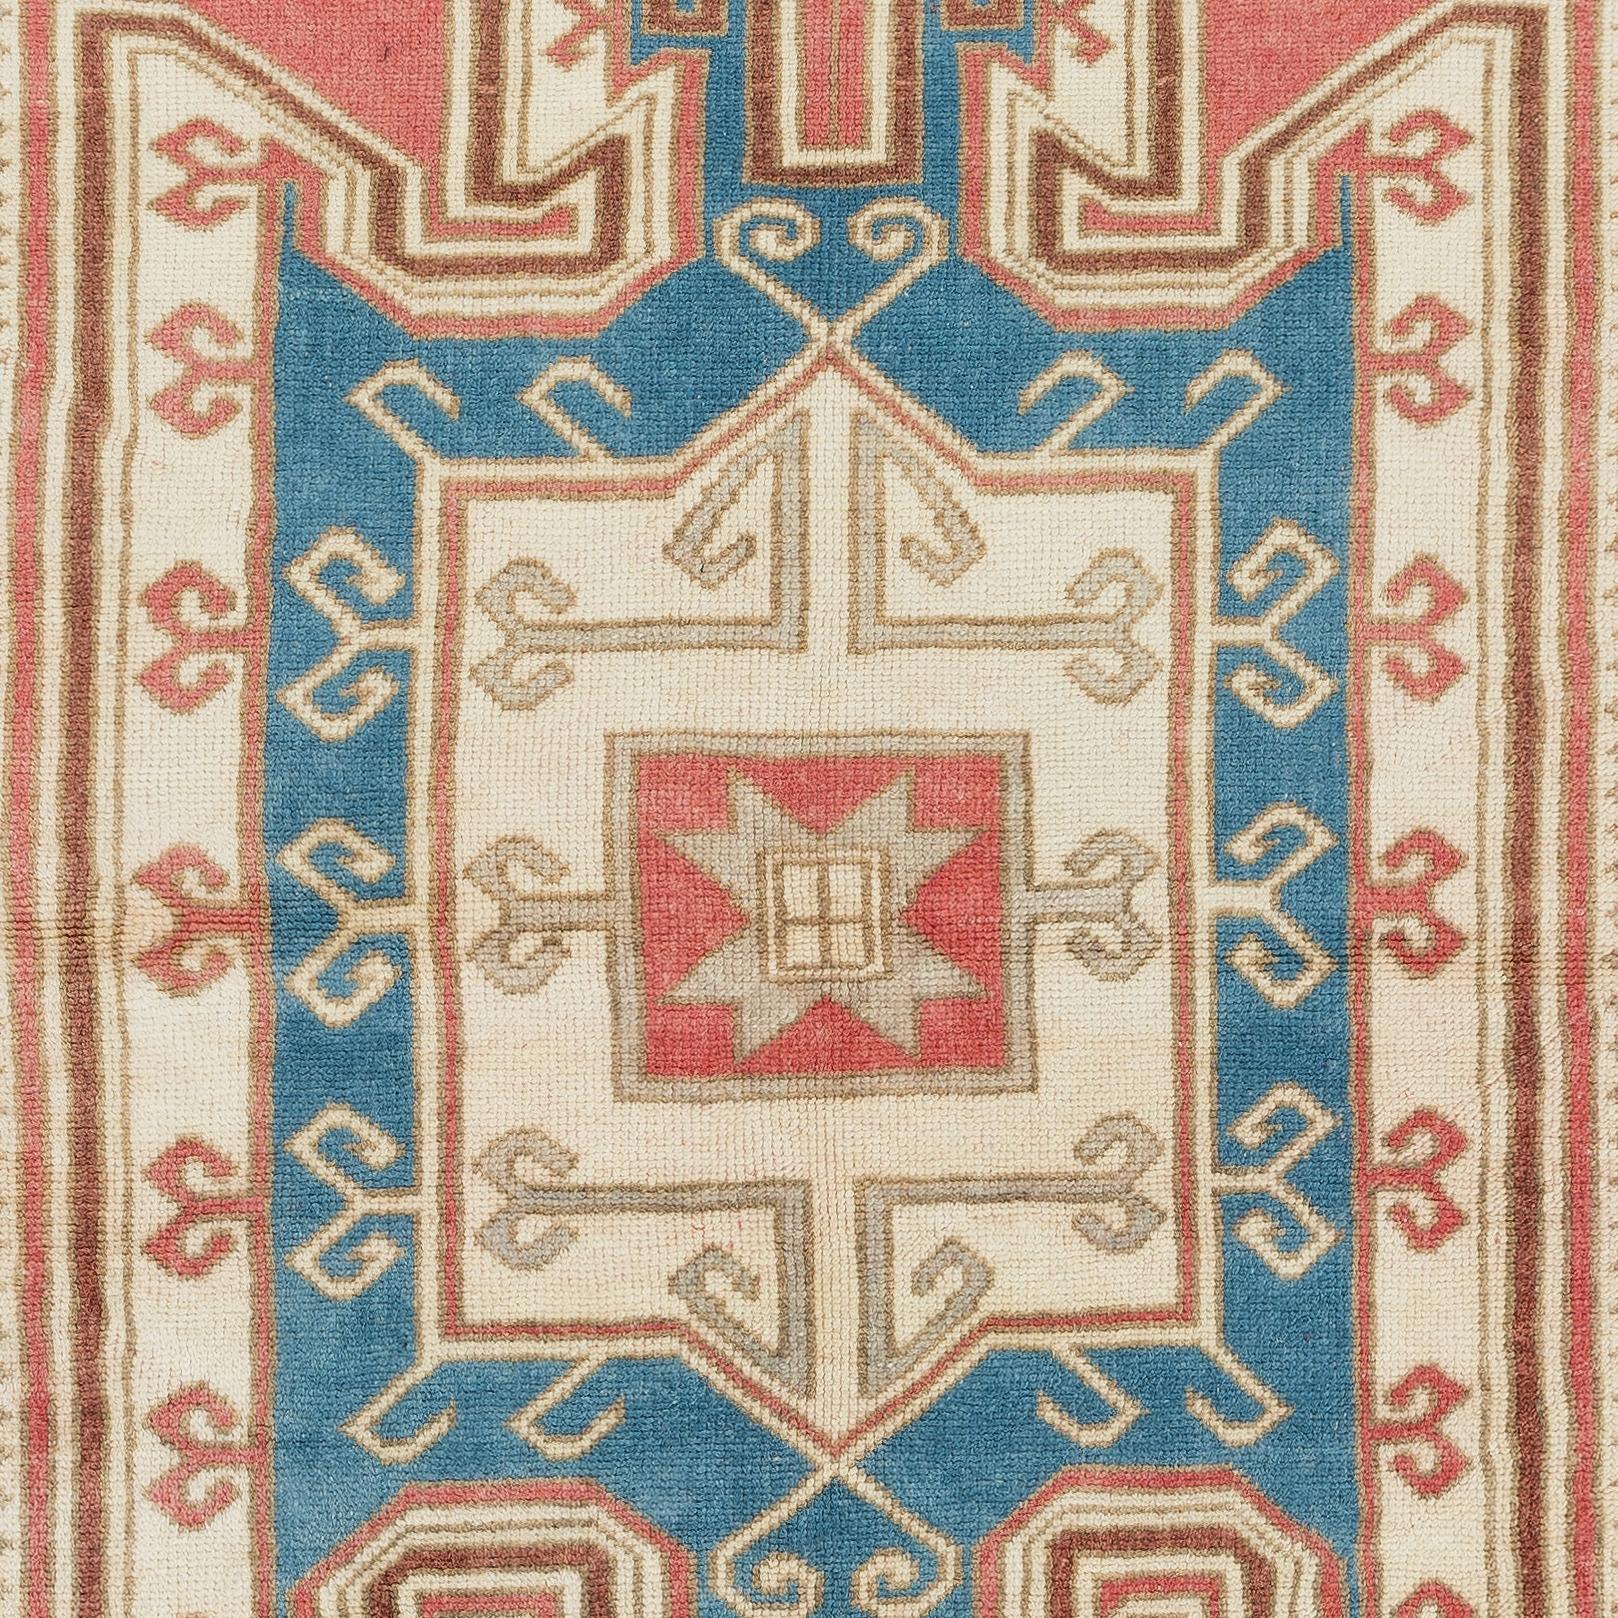 Hand-Knotted 3.8x6 Ft Vintage Handmade Geometric Turkish Accent Rug in Red, Blue and Beige For Sale